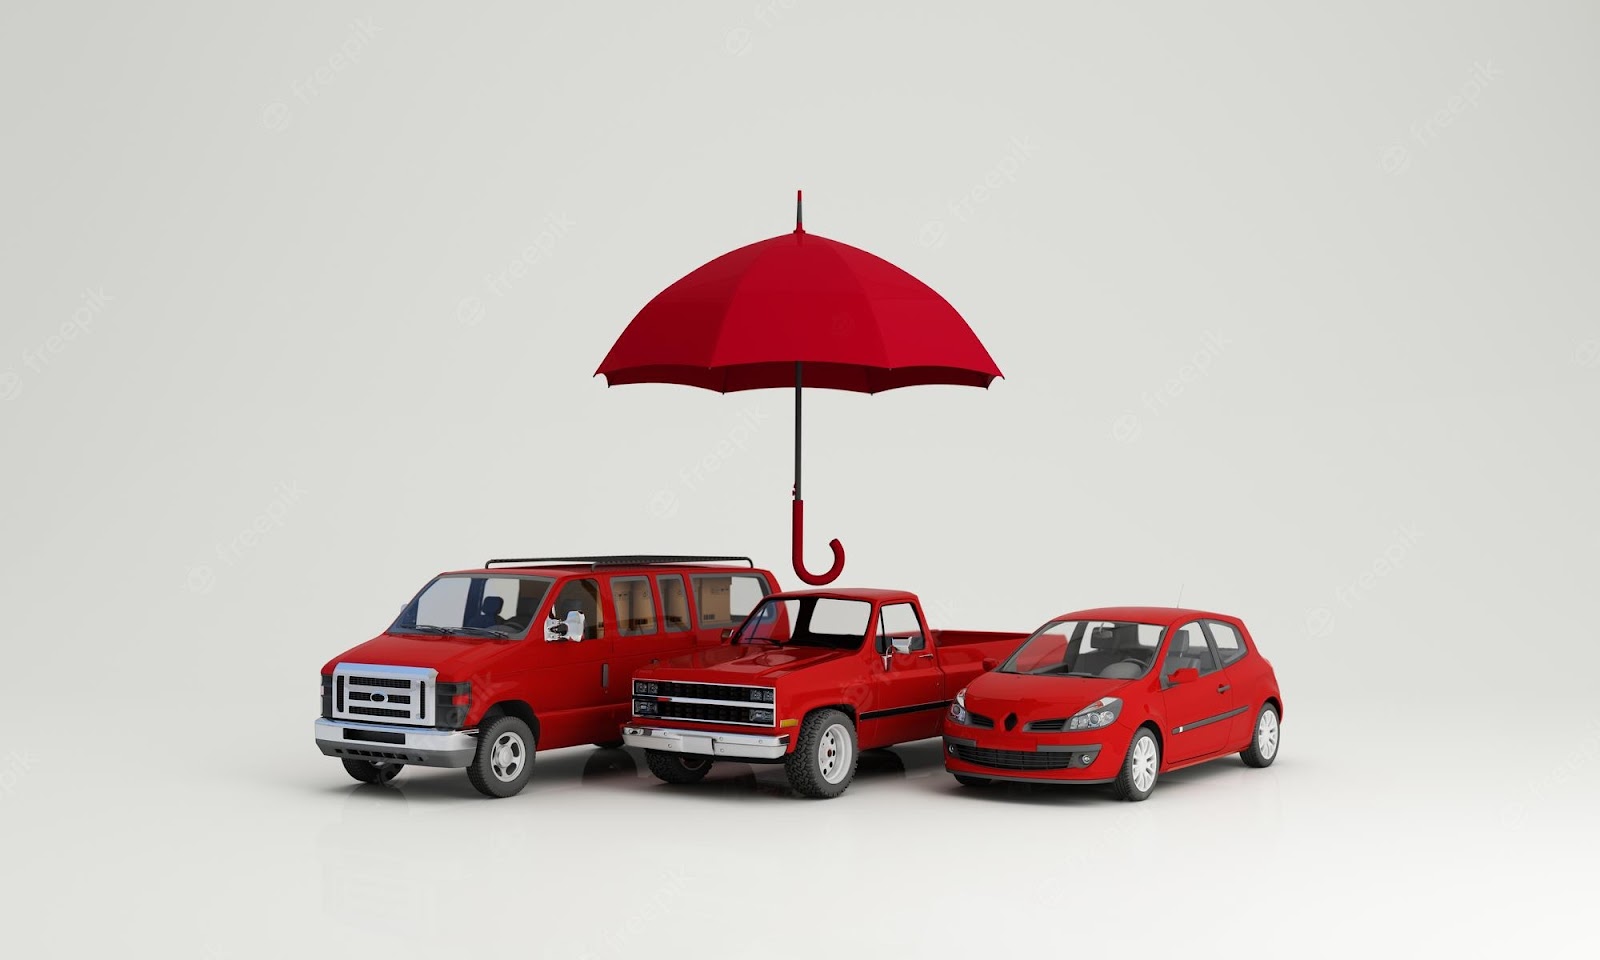 Premium Photo | Car protection and safety assurance concept modern red automobile sedan truck van under white umbrella isolated on white background 3d illustration rendering